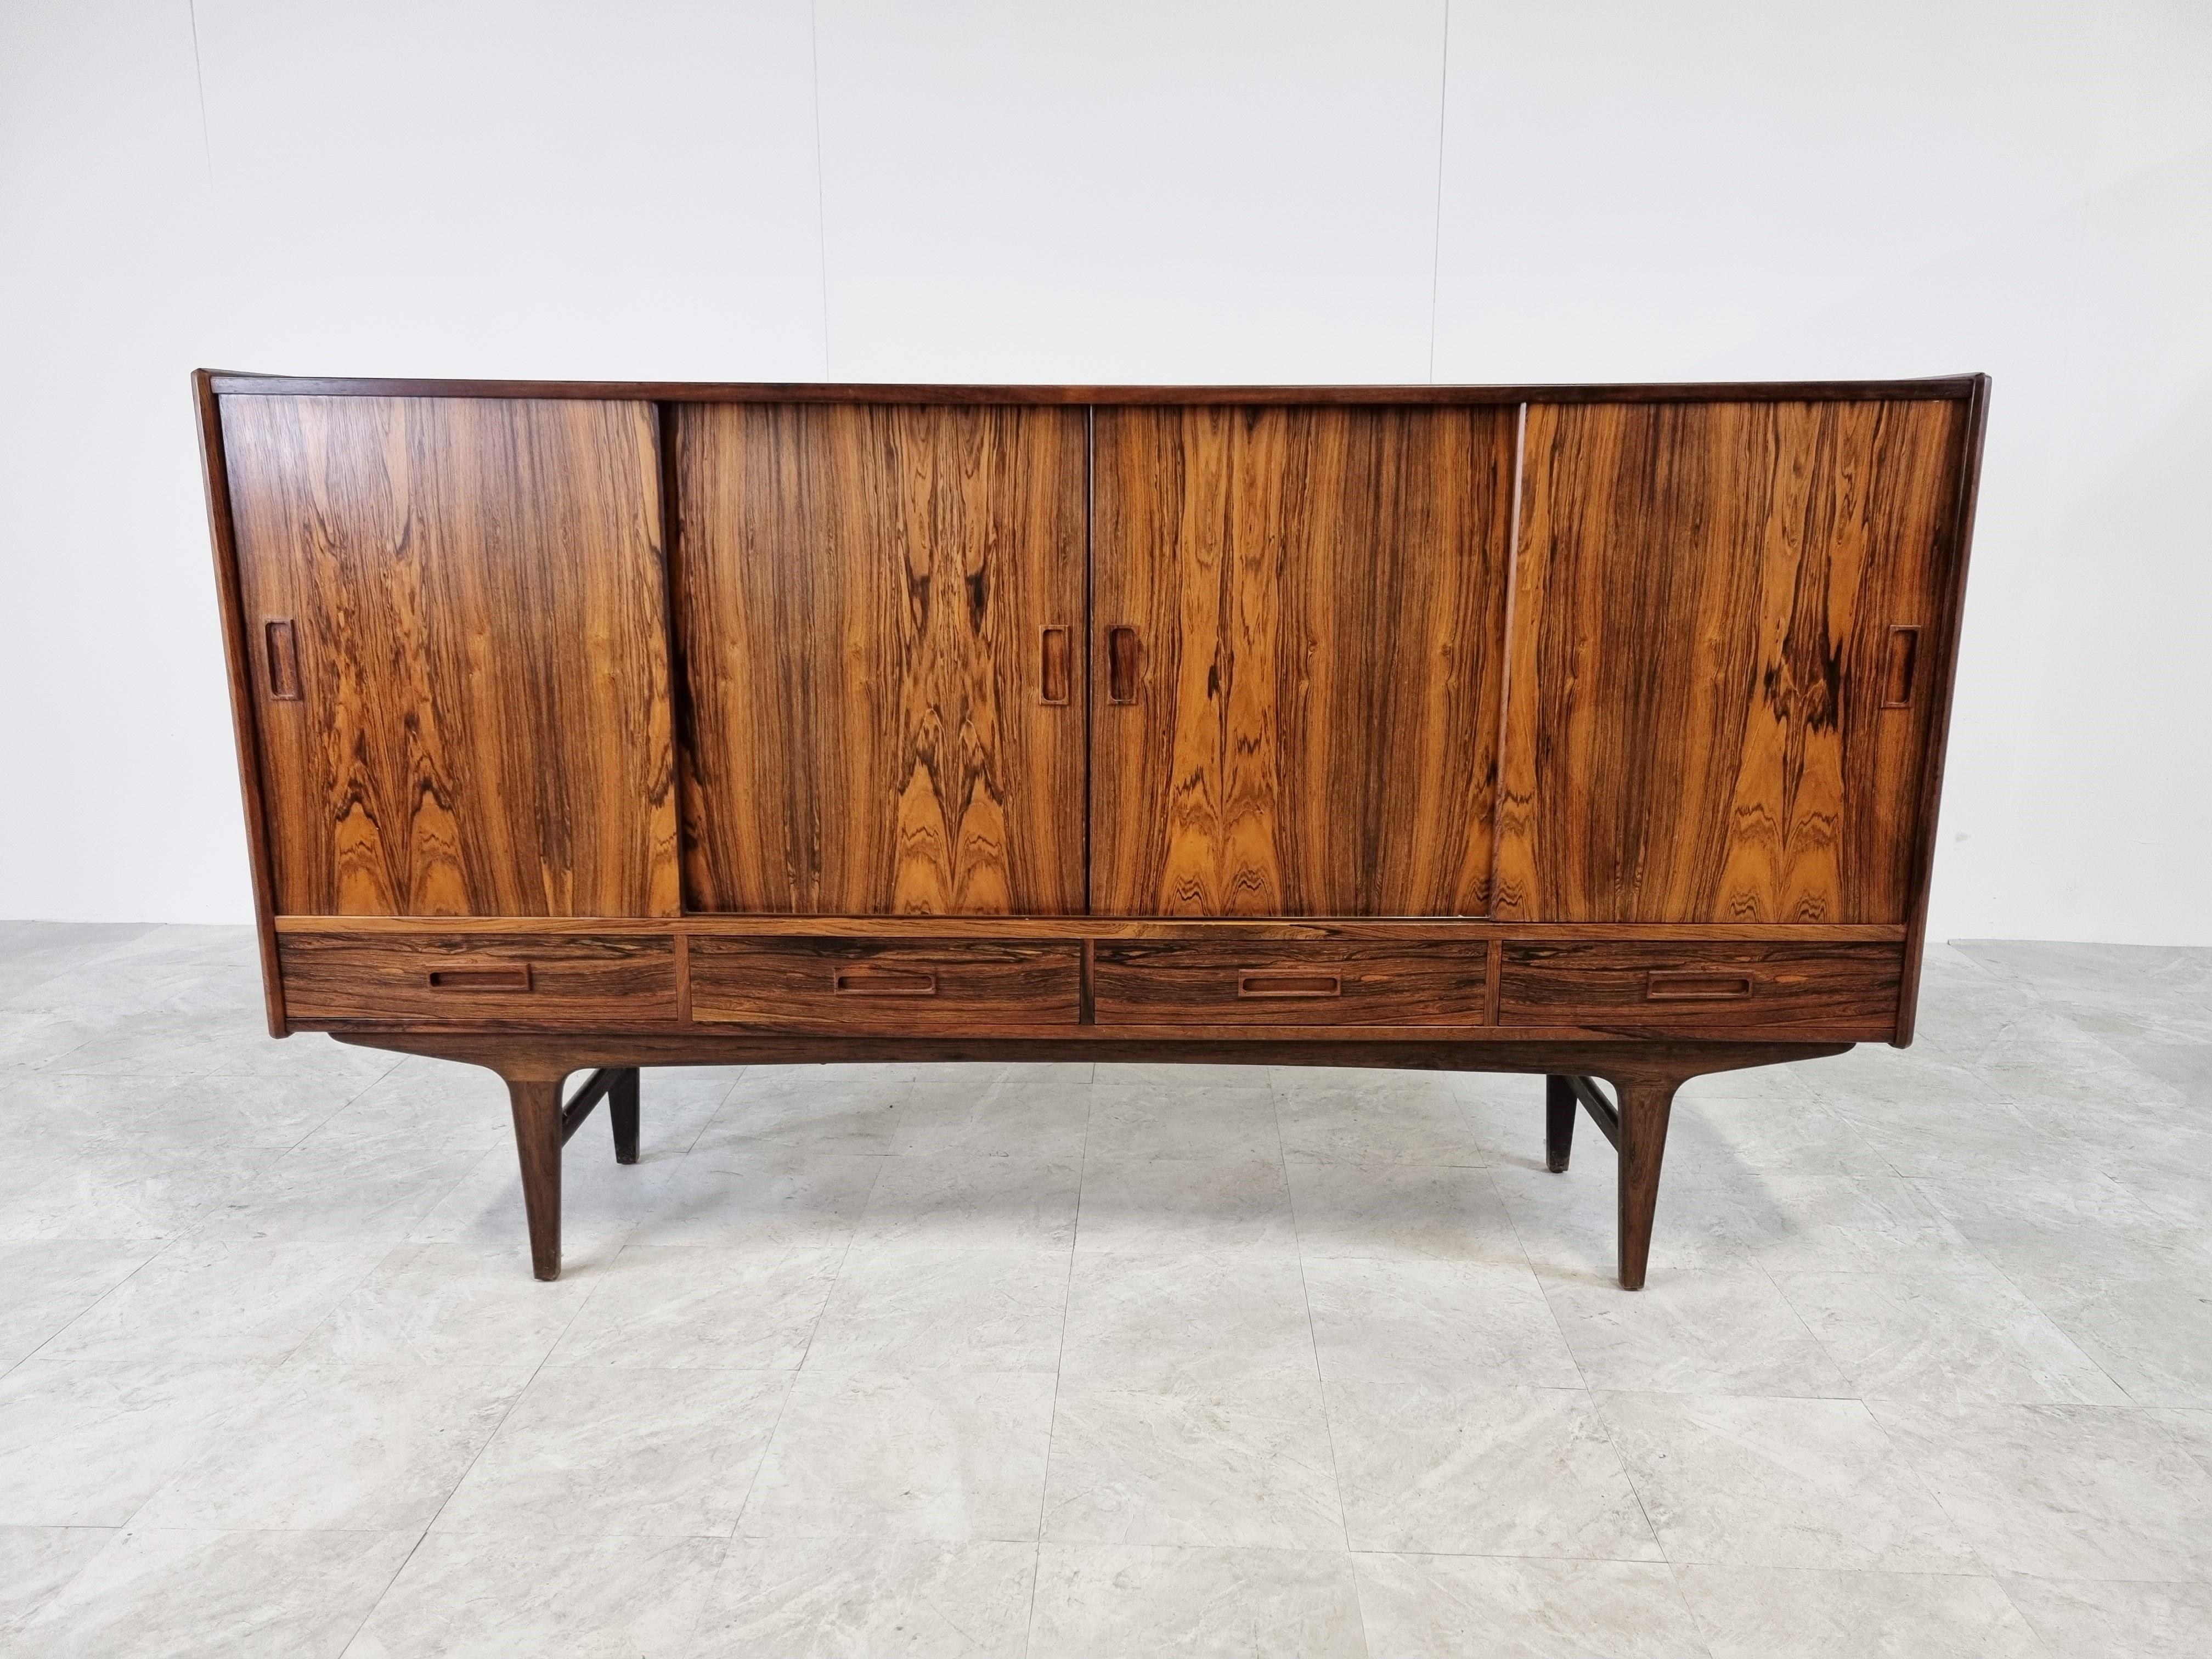 Striking mid century rosewood highboard designed by Borge Seindal for P. Westergaard Mobelfabrik.

The highboard has beautiful wood vaining.

It has 4 sliding doors and 4 drawers providing plenty of storage space.

It also has 3 drawers